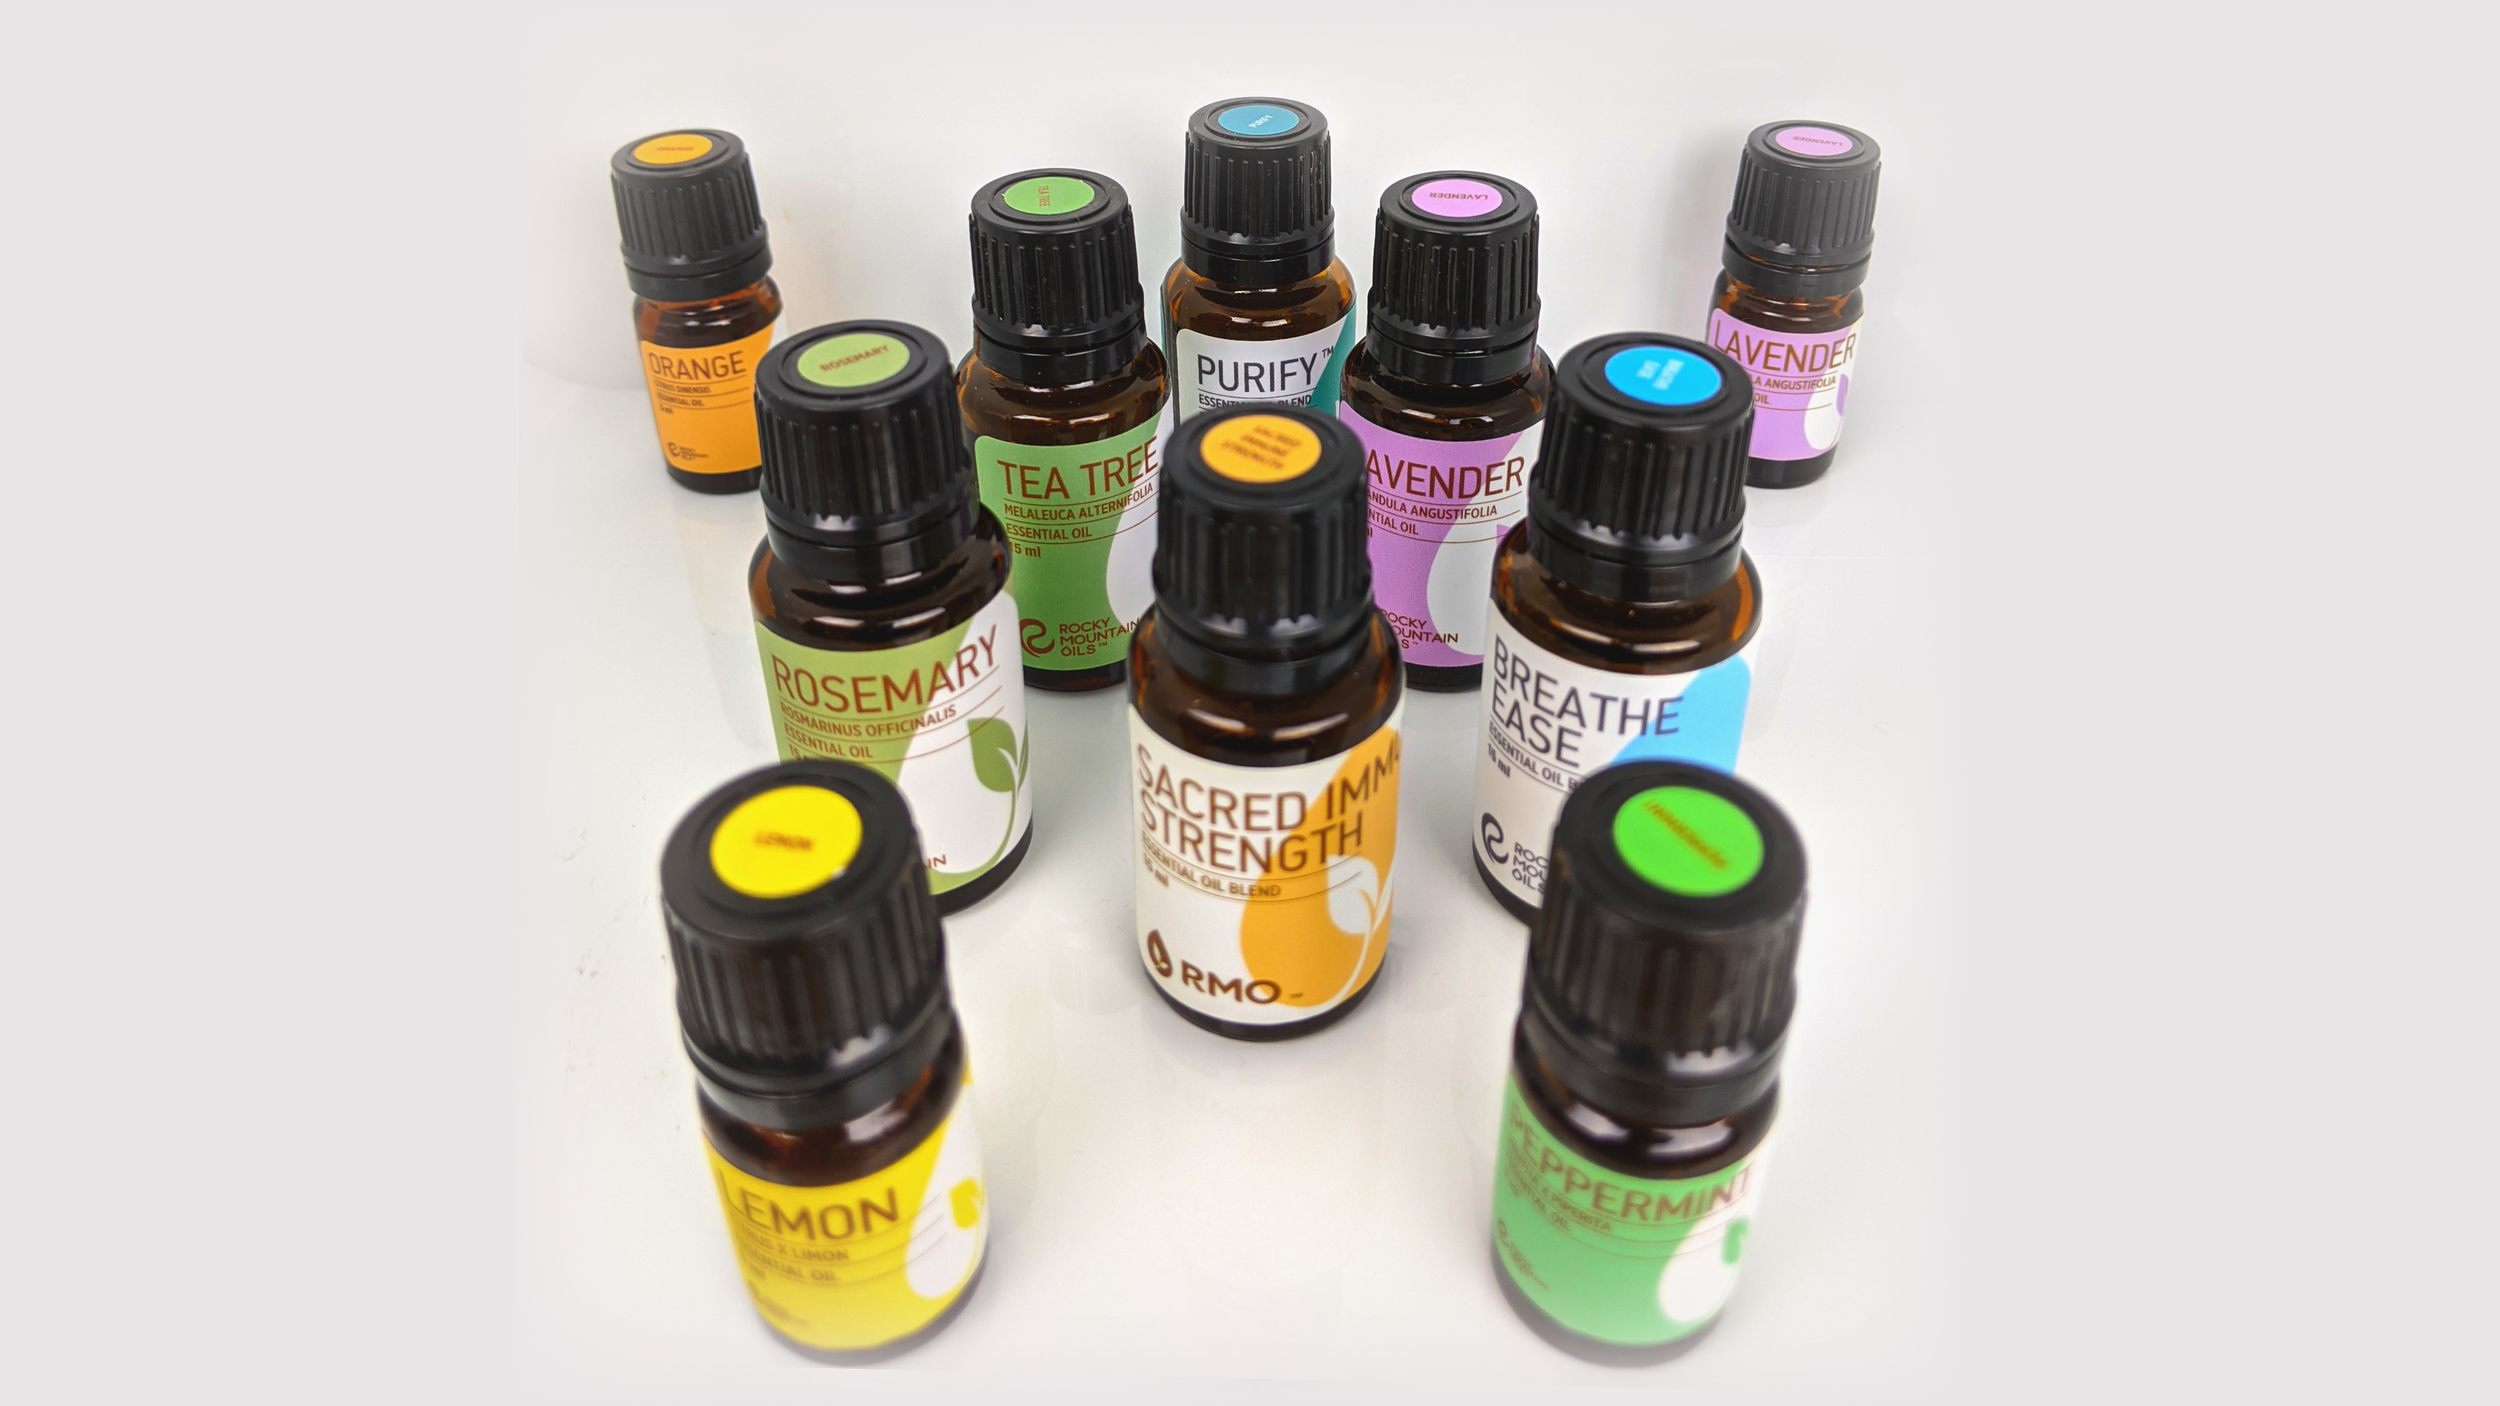 Rocky Mountain Oils  is my go-to company. I purchase pure jojoba and essential oils from RMO, and I love that they use recyclable packaging.